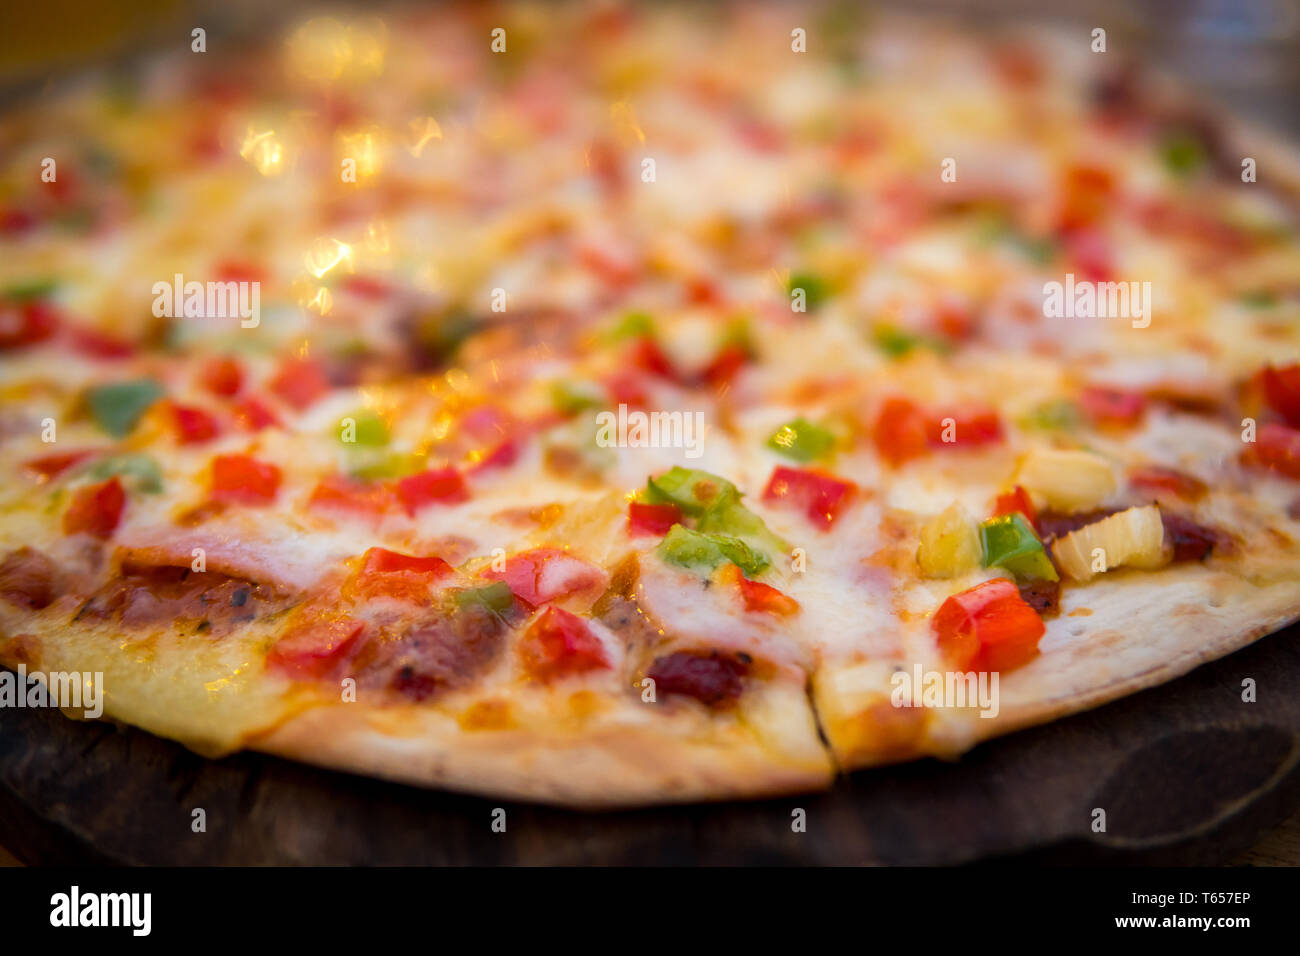 fresh sliced pizza with vegetables Stock Photo